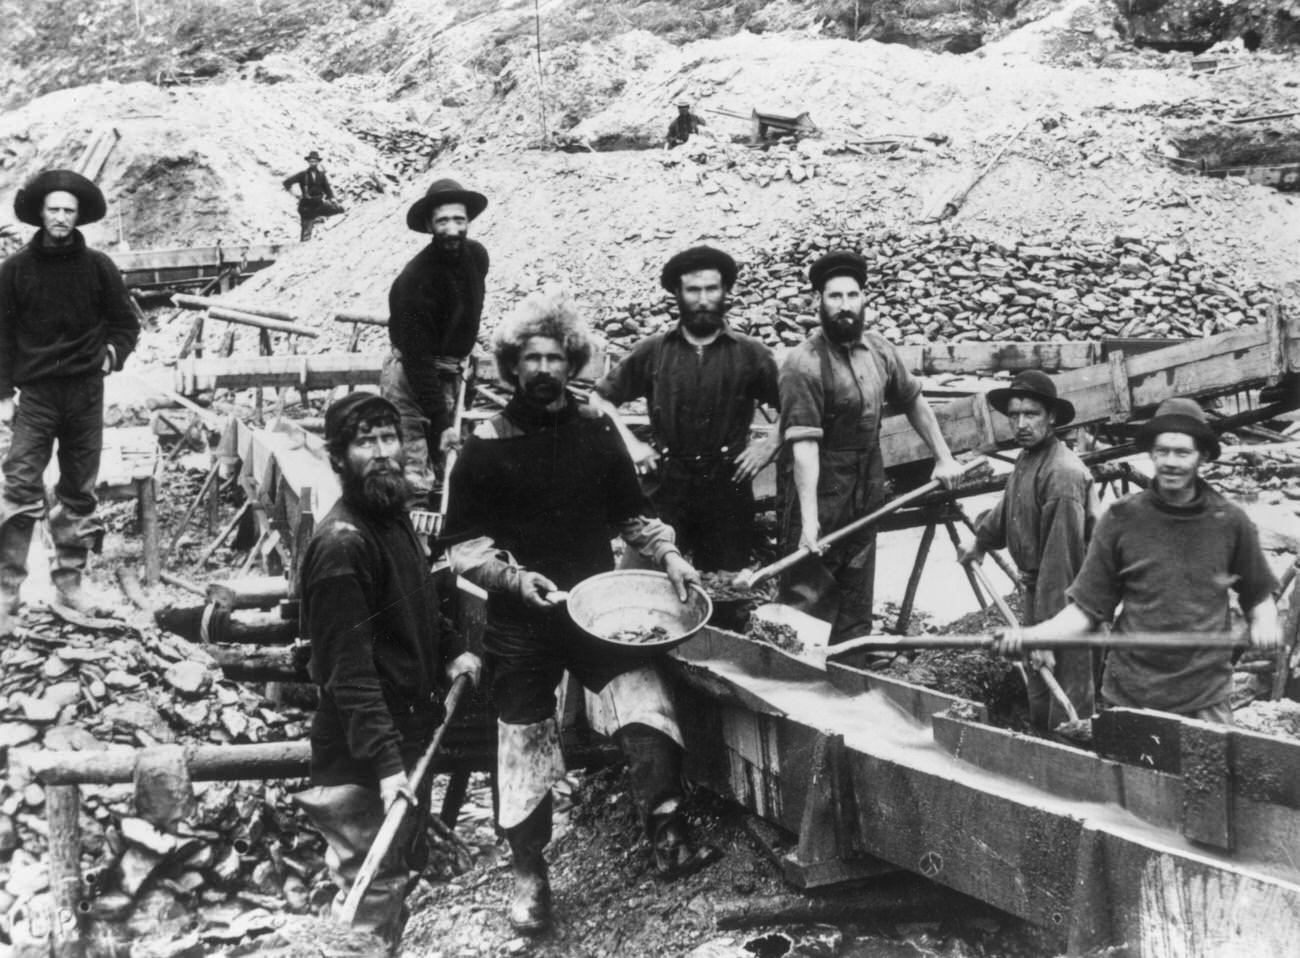 Jubilant miners displaying a large gold nugget during the Klondike Gold Rush, 1897.